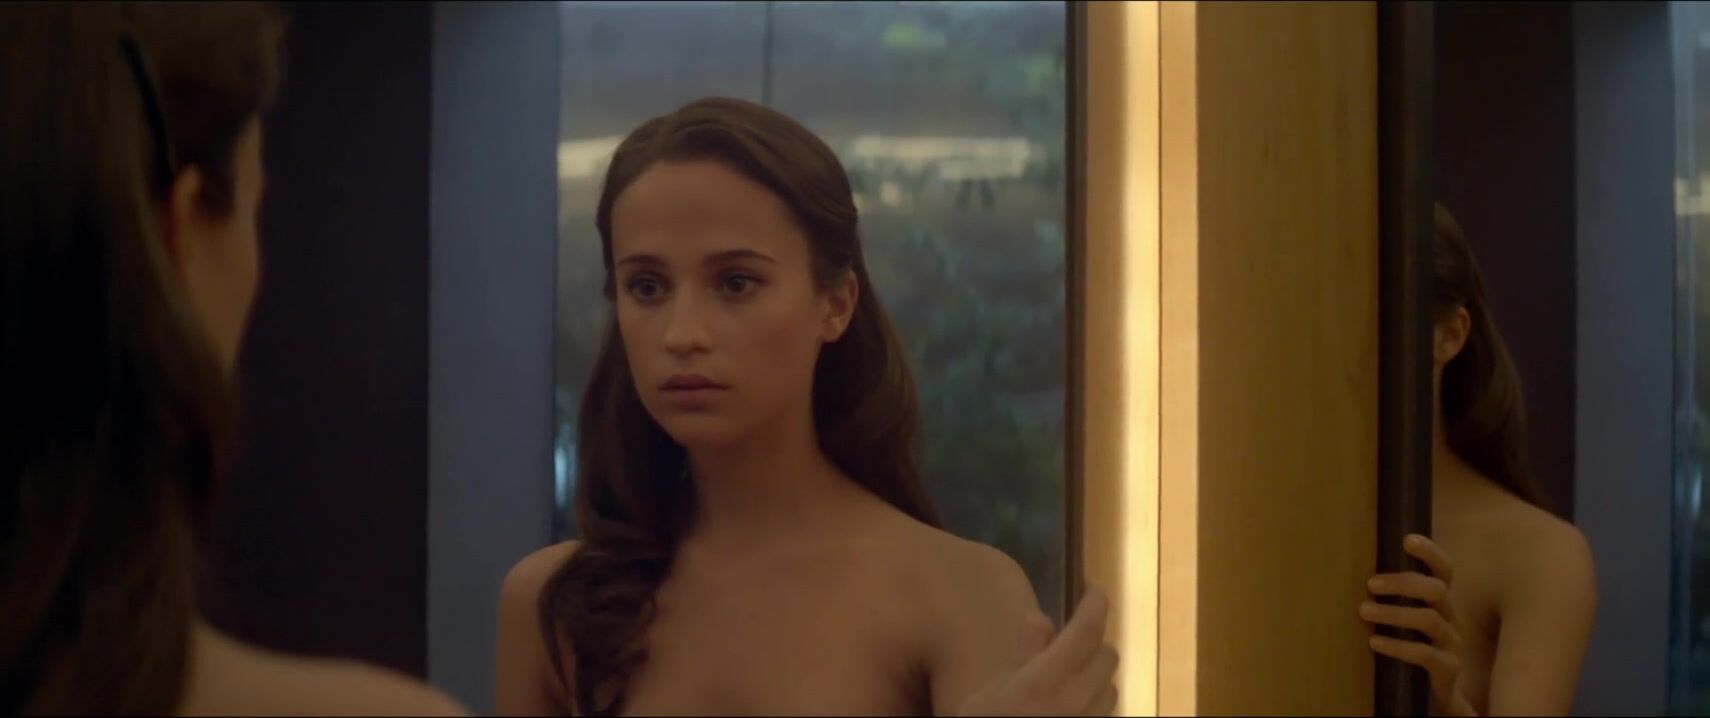 DTVideo Naked Alicia Vikander loves being sexy in feature film moment from Ex Machina (2015) Freeporn